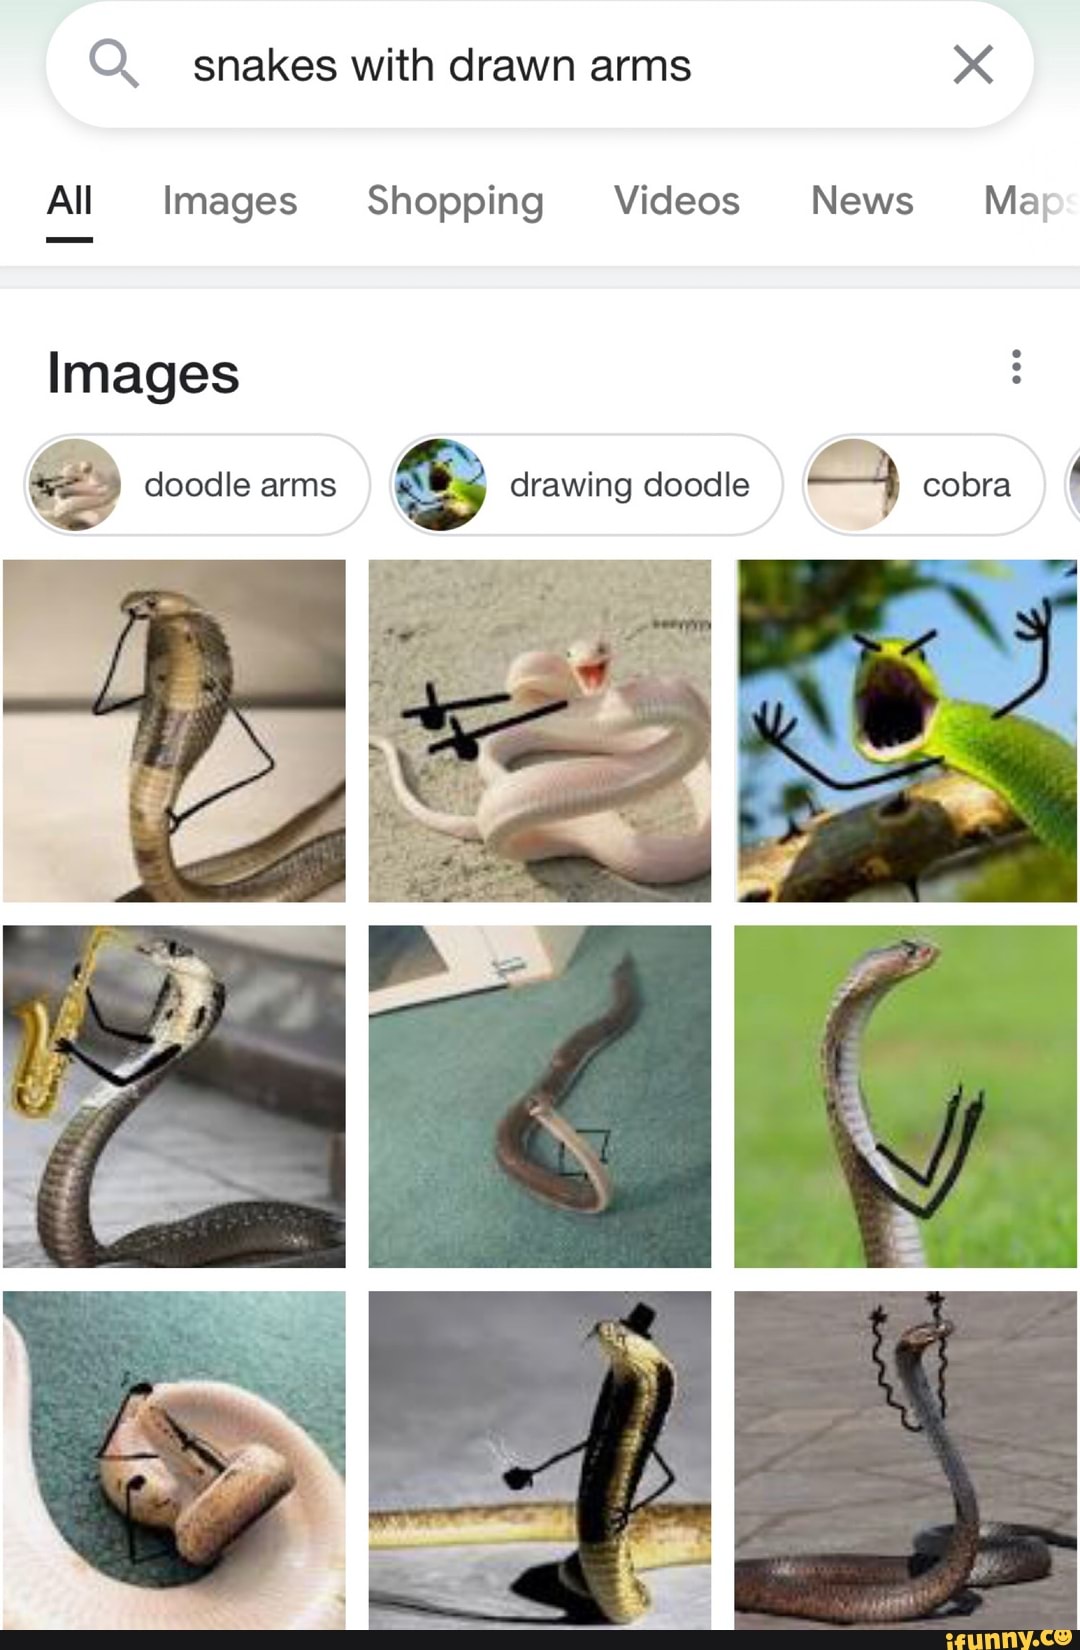 Drawing Doodle Arms On Snakes Is Hilarious